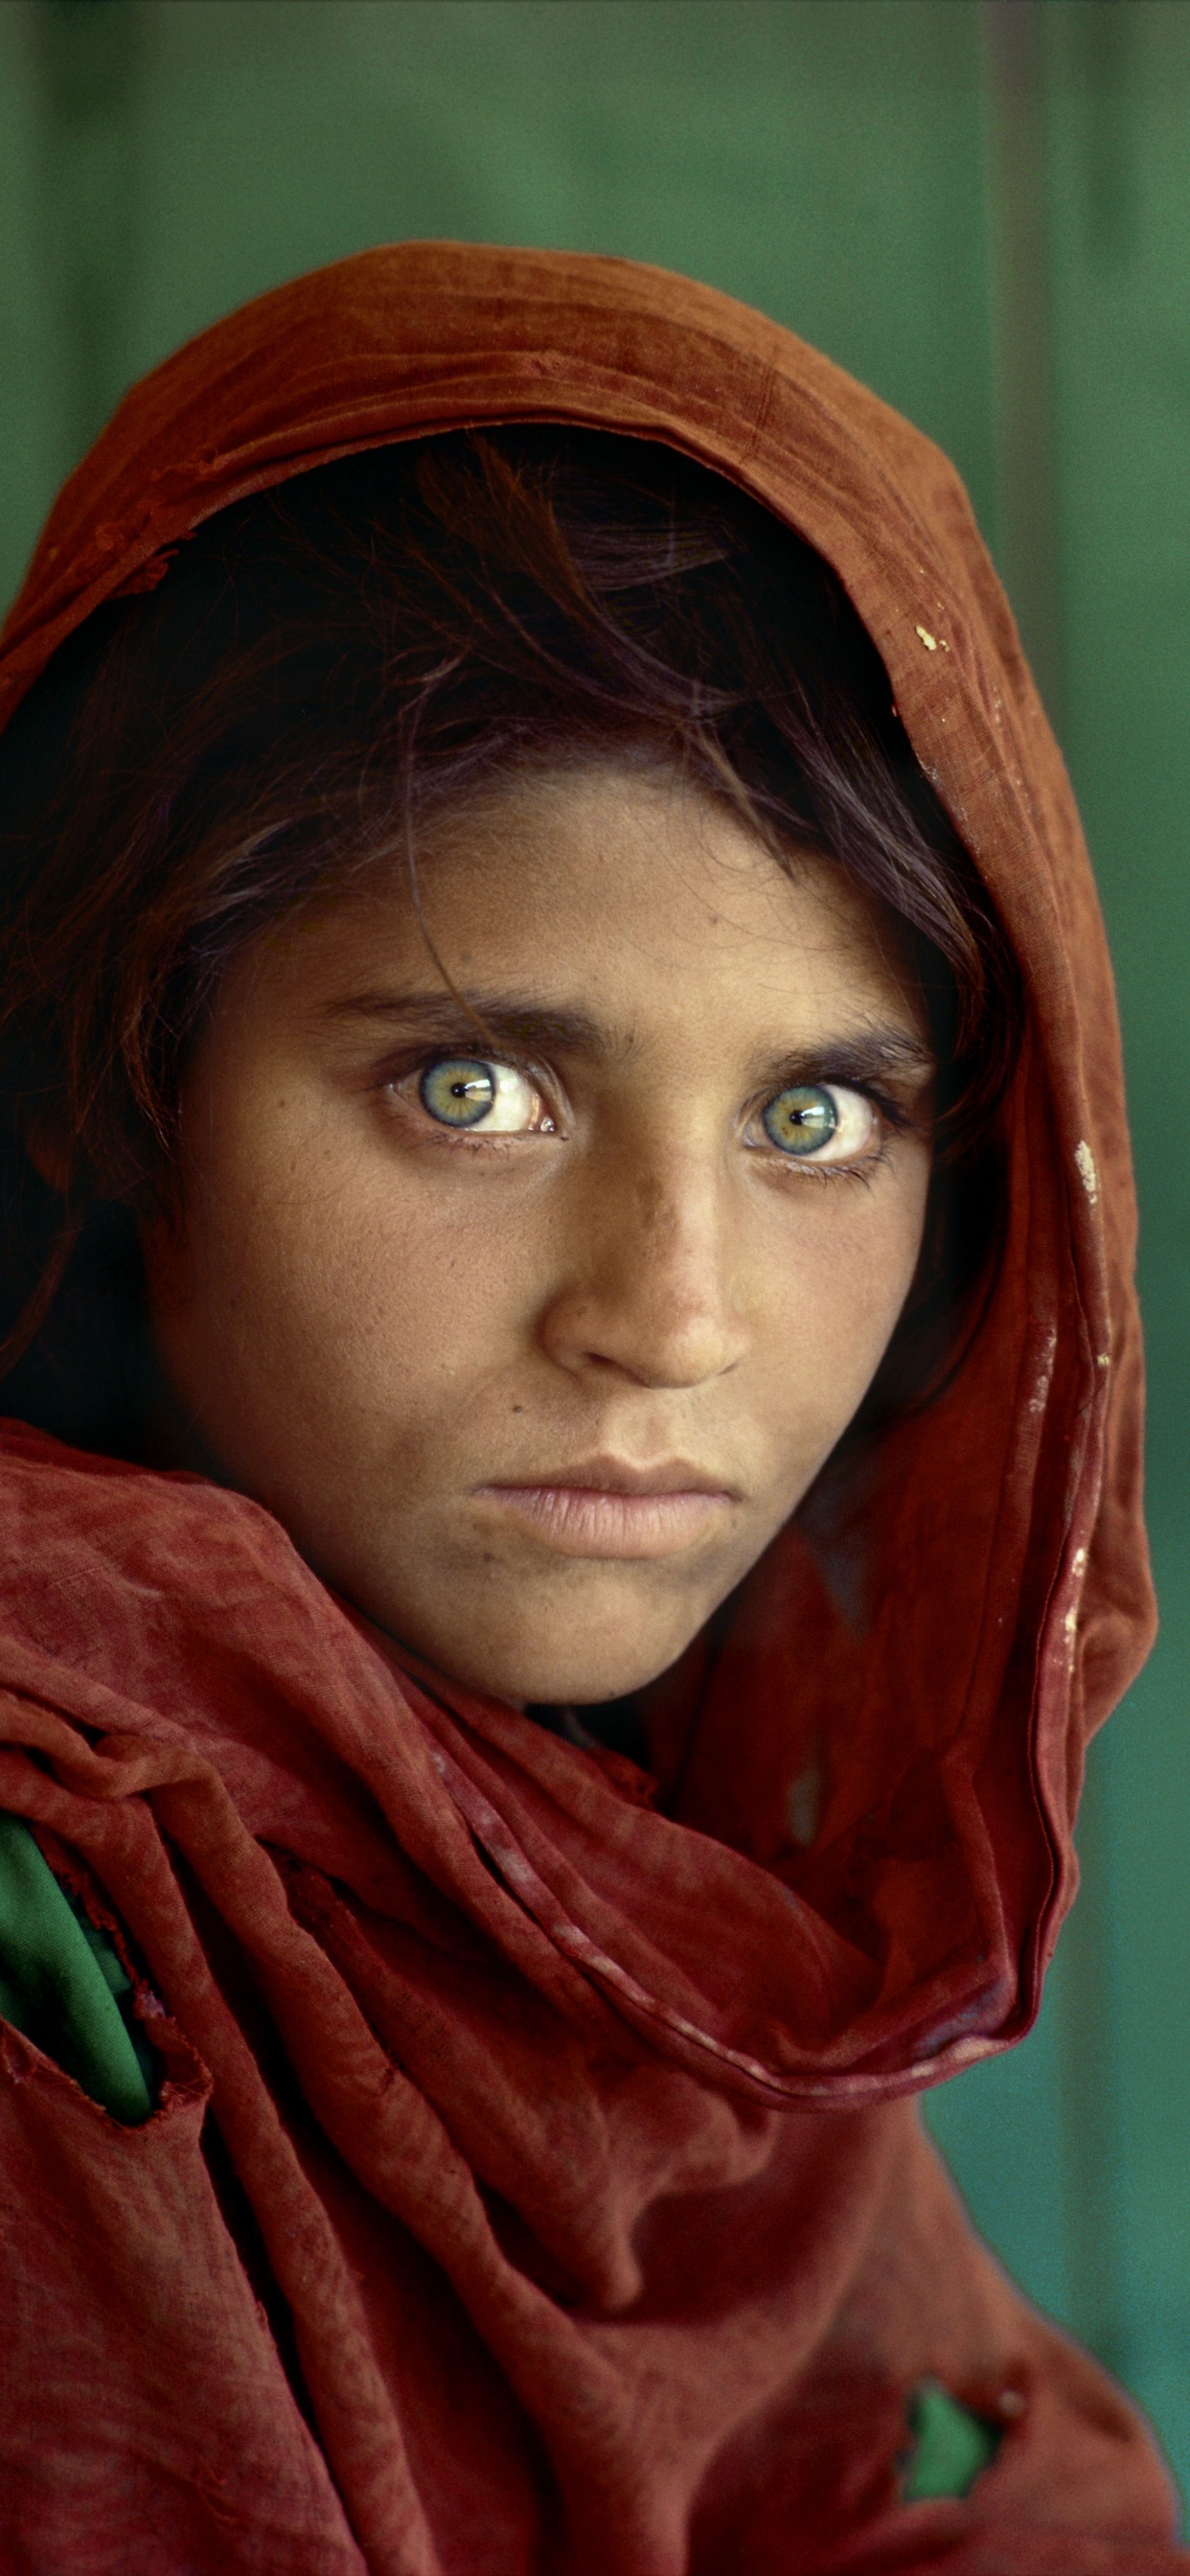 Fille Afghane, Afghanistan, National Geographic, Face, Front. Wallpaper in 1242x2688 Resolution